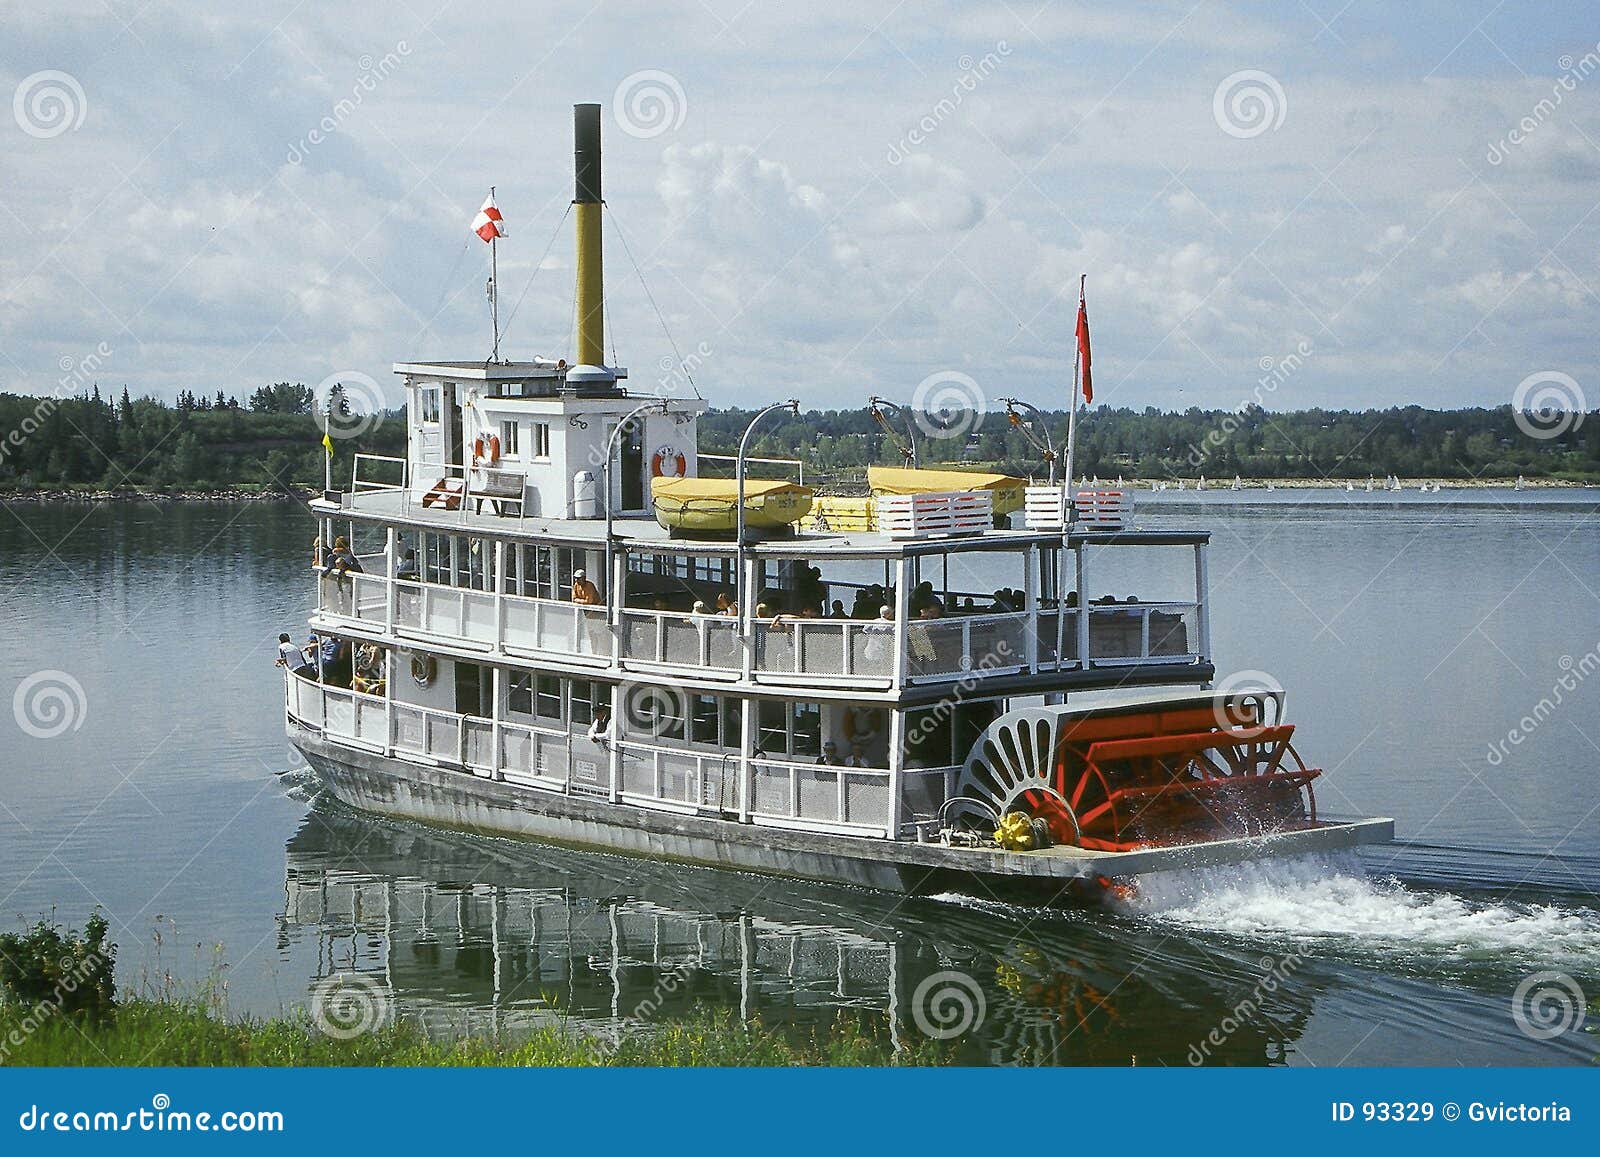 riverboat clipart - photo #47